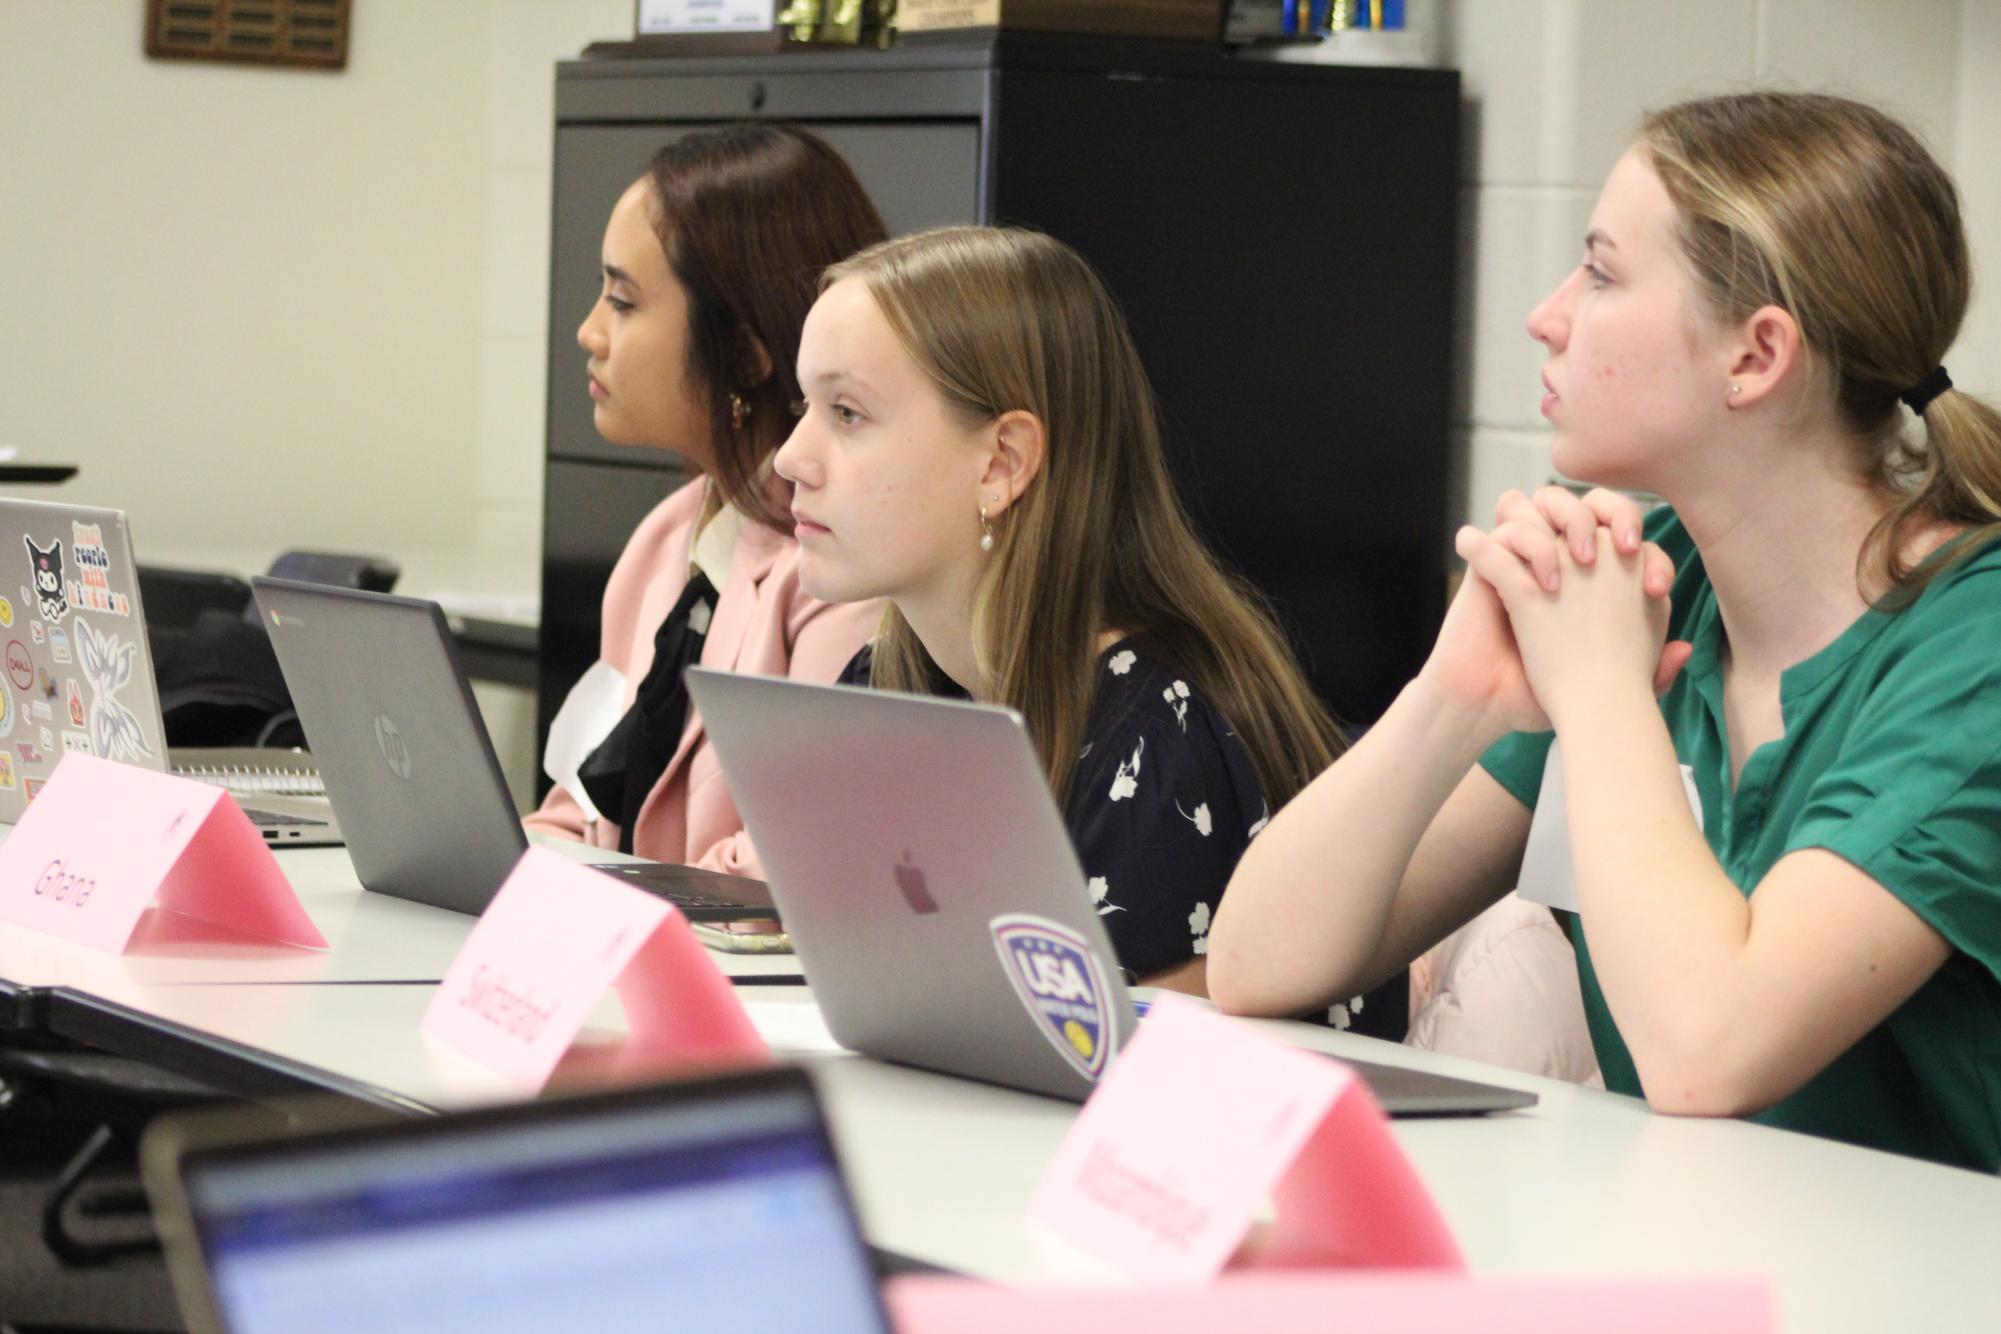 
During the Model UN conference Oct. 28, Elizabeth Ahlin (9) and Sophia Fickies (11) listen intently to the conversation taking place.